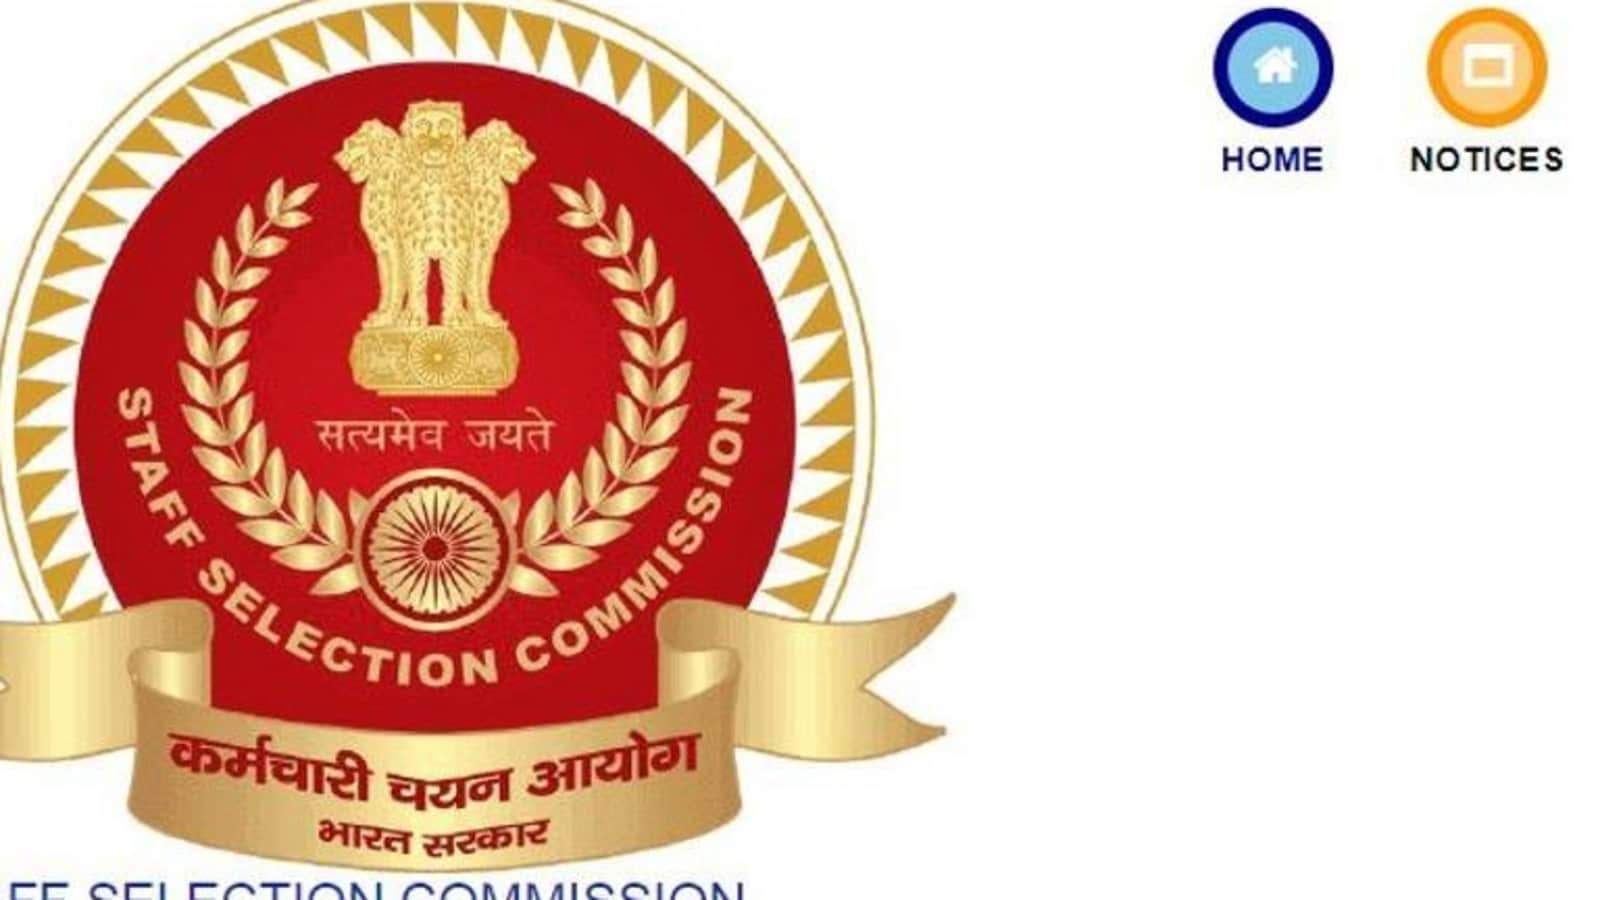 SSC CGL 2020 tier 1 admit cards for all regions released, direct links here